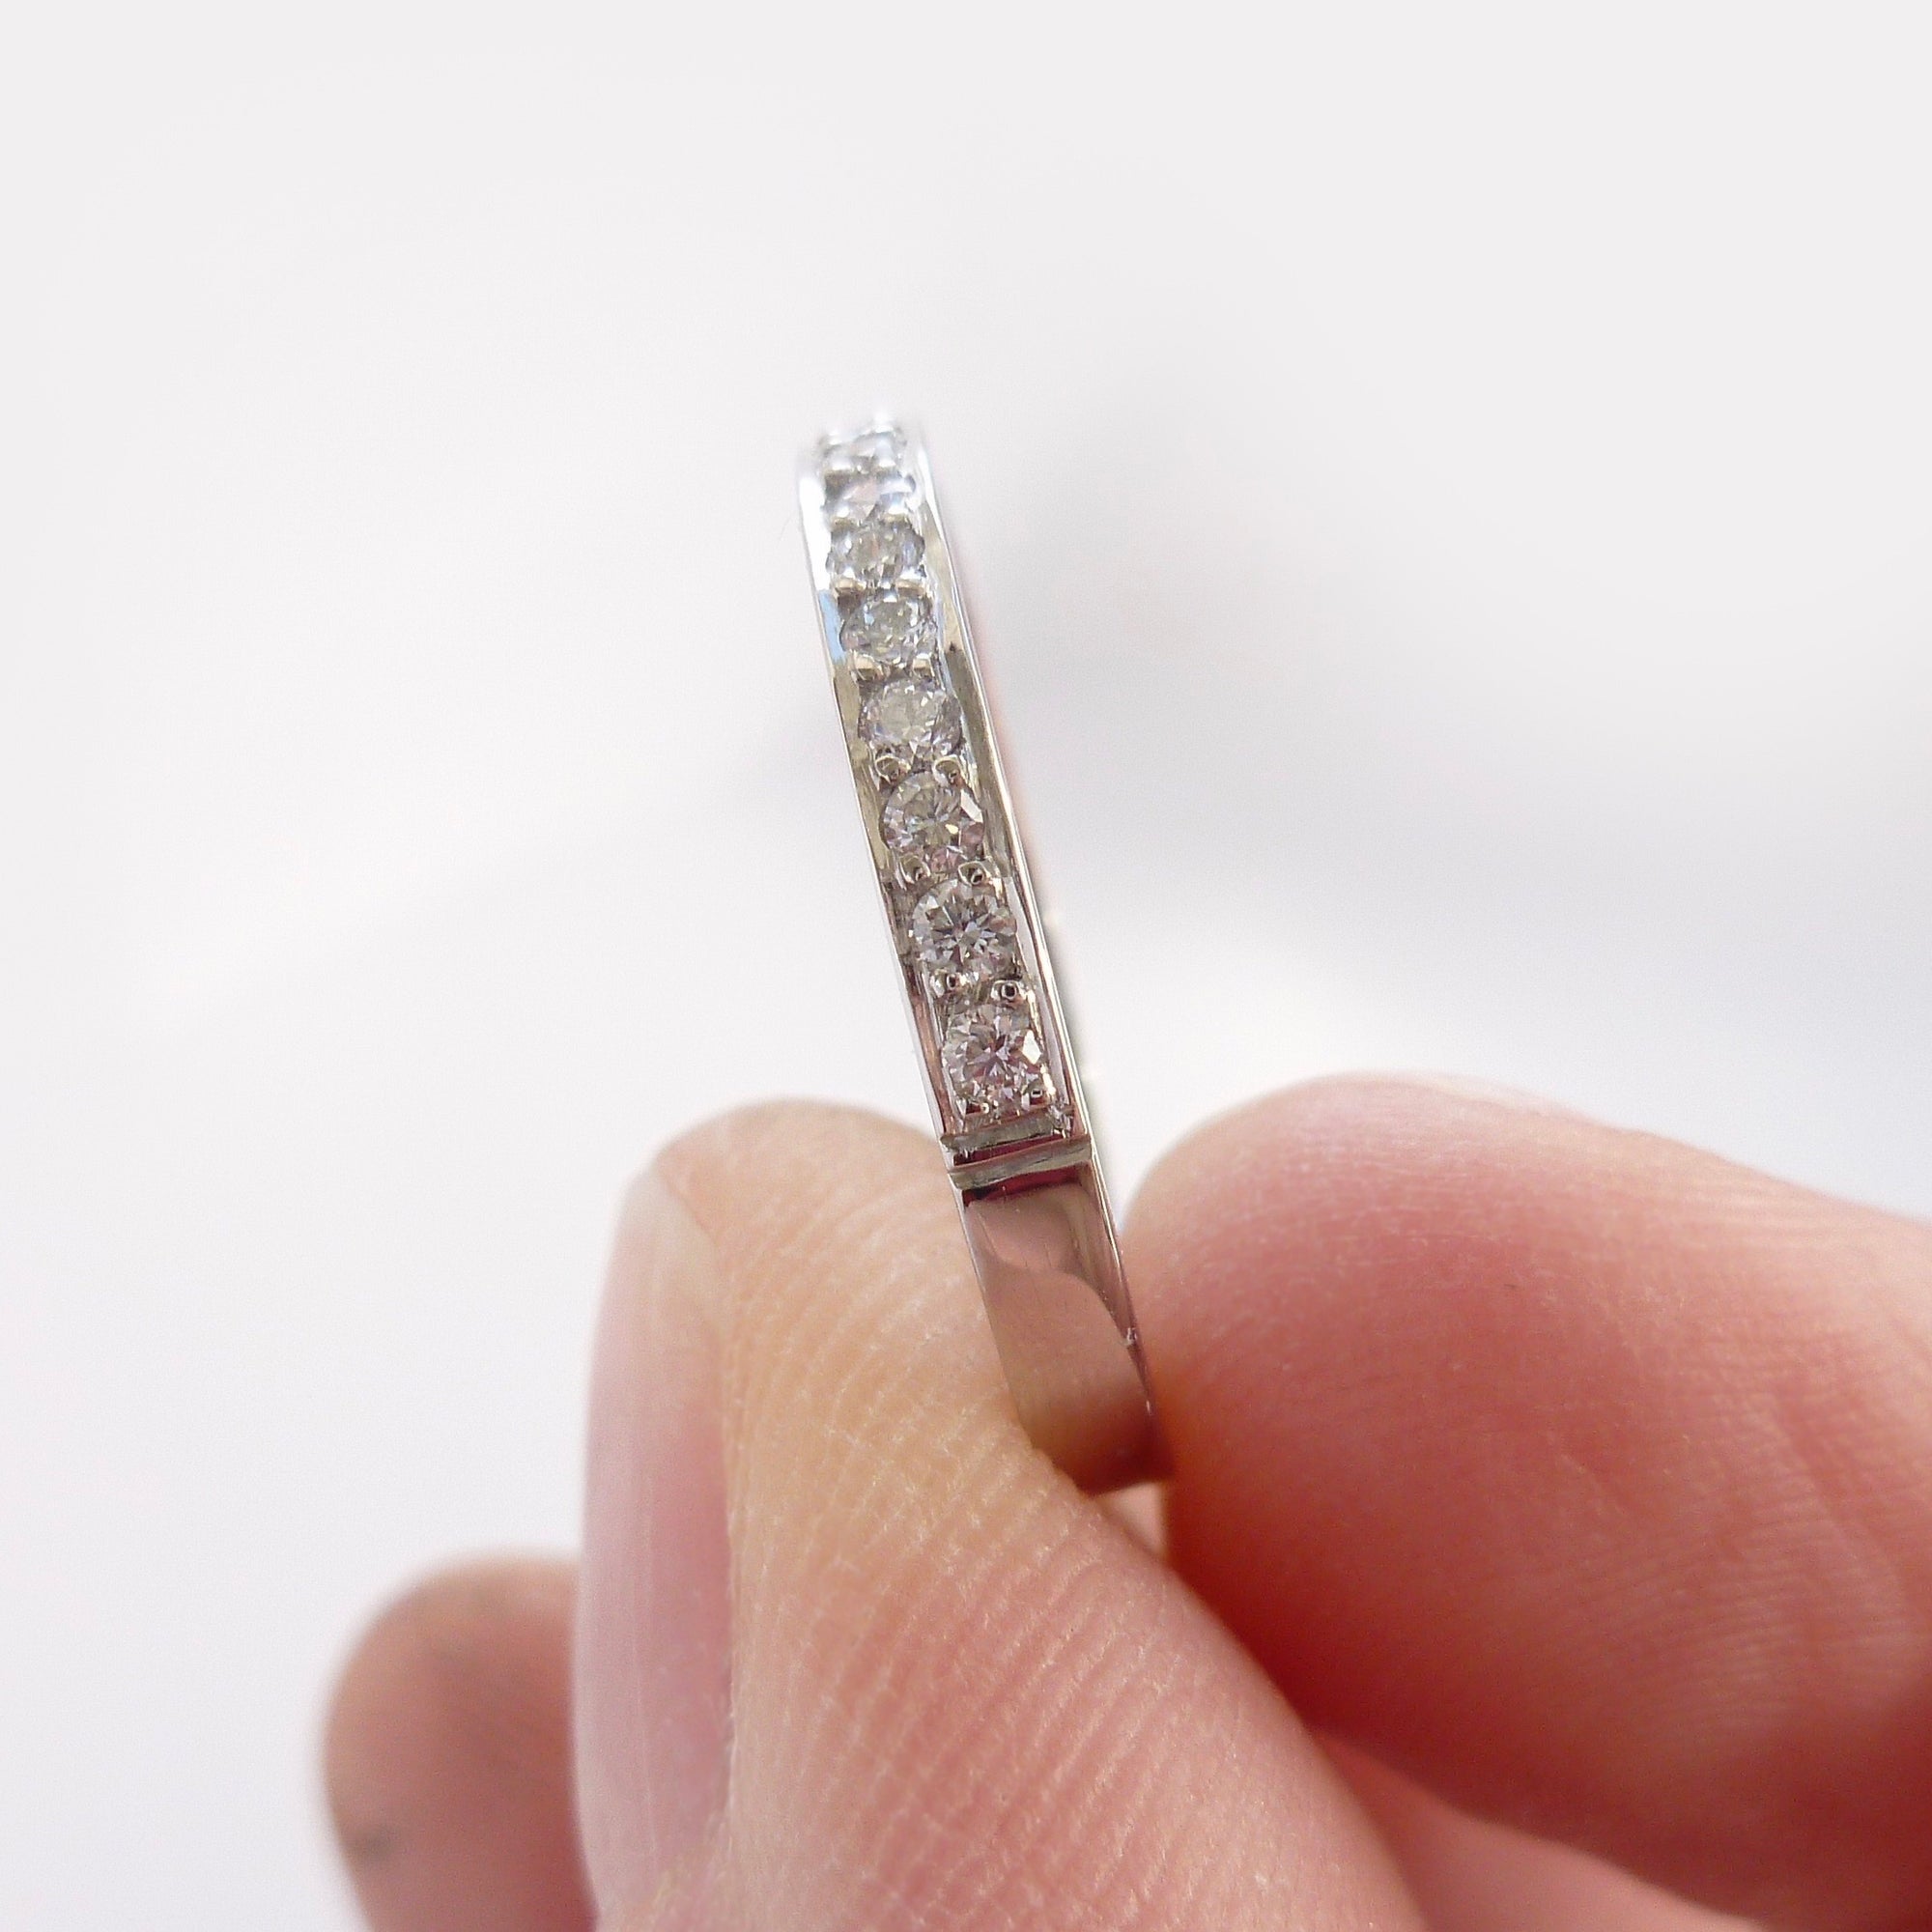 Classic eternity ring design by Sue Lane contemporary jewellery.